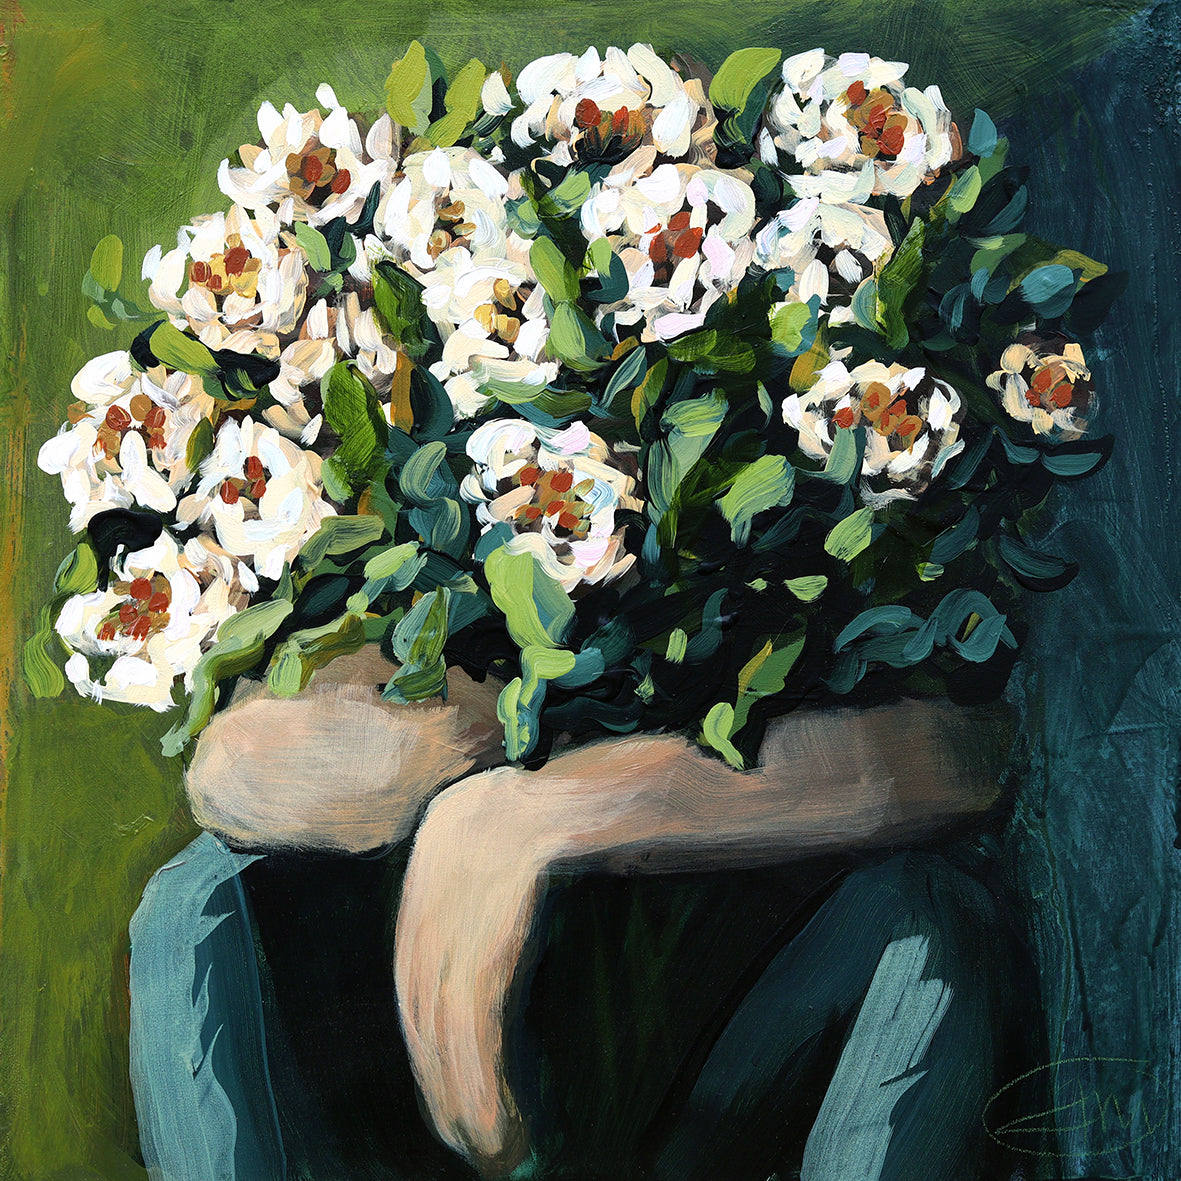 Painting of flowers encircled by a persons arms